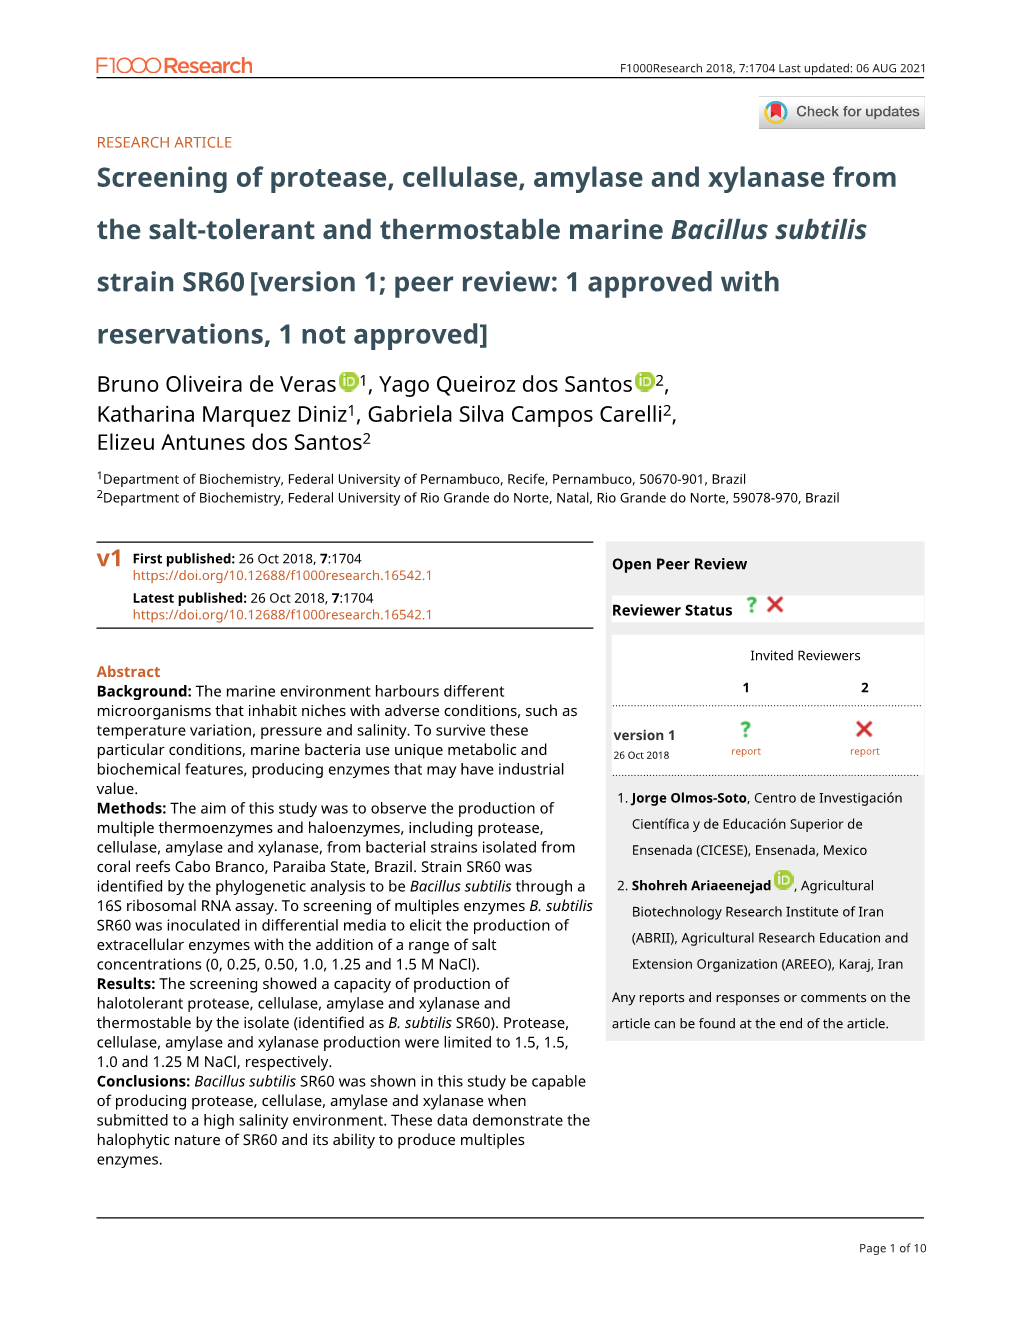 Screening of Protease, Cellulase, Amylase and Xylanase From